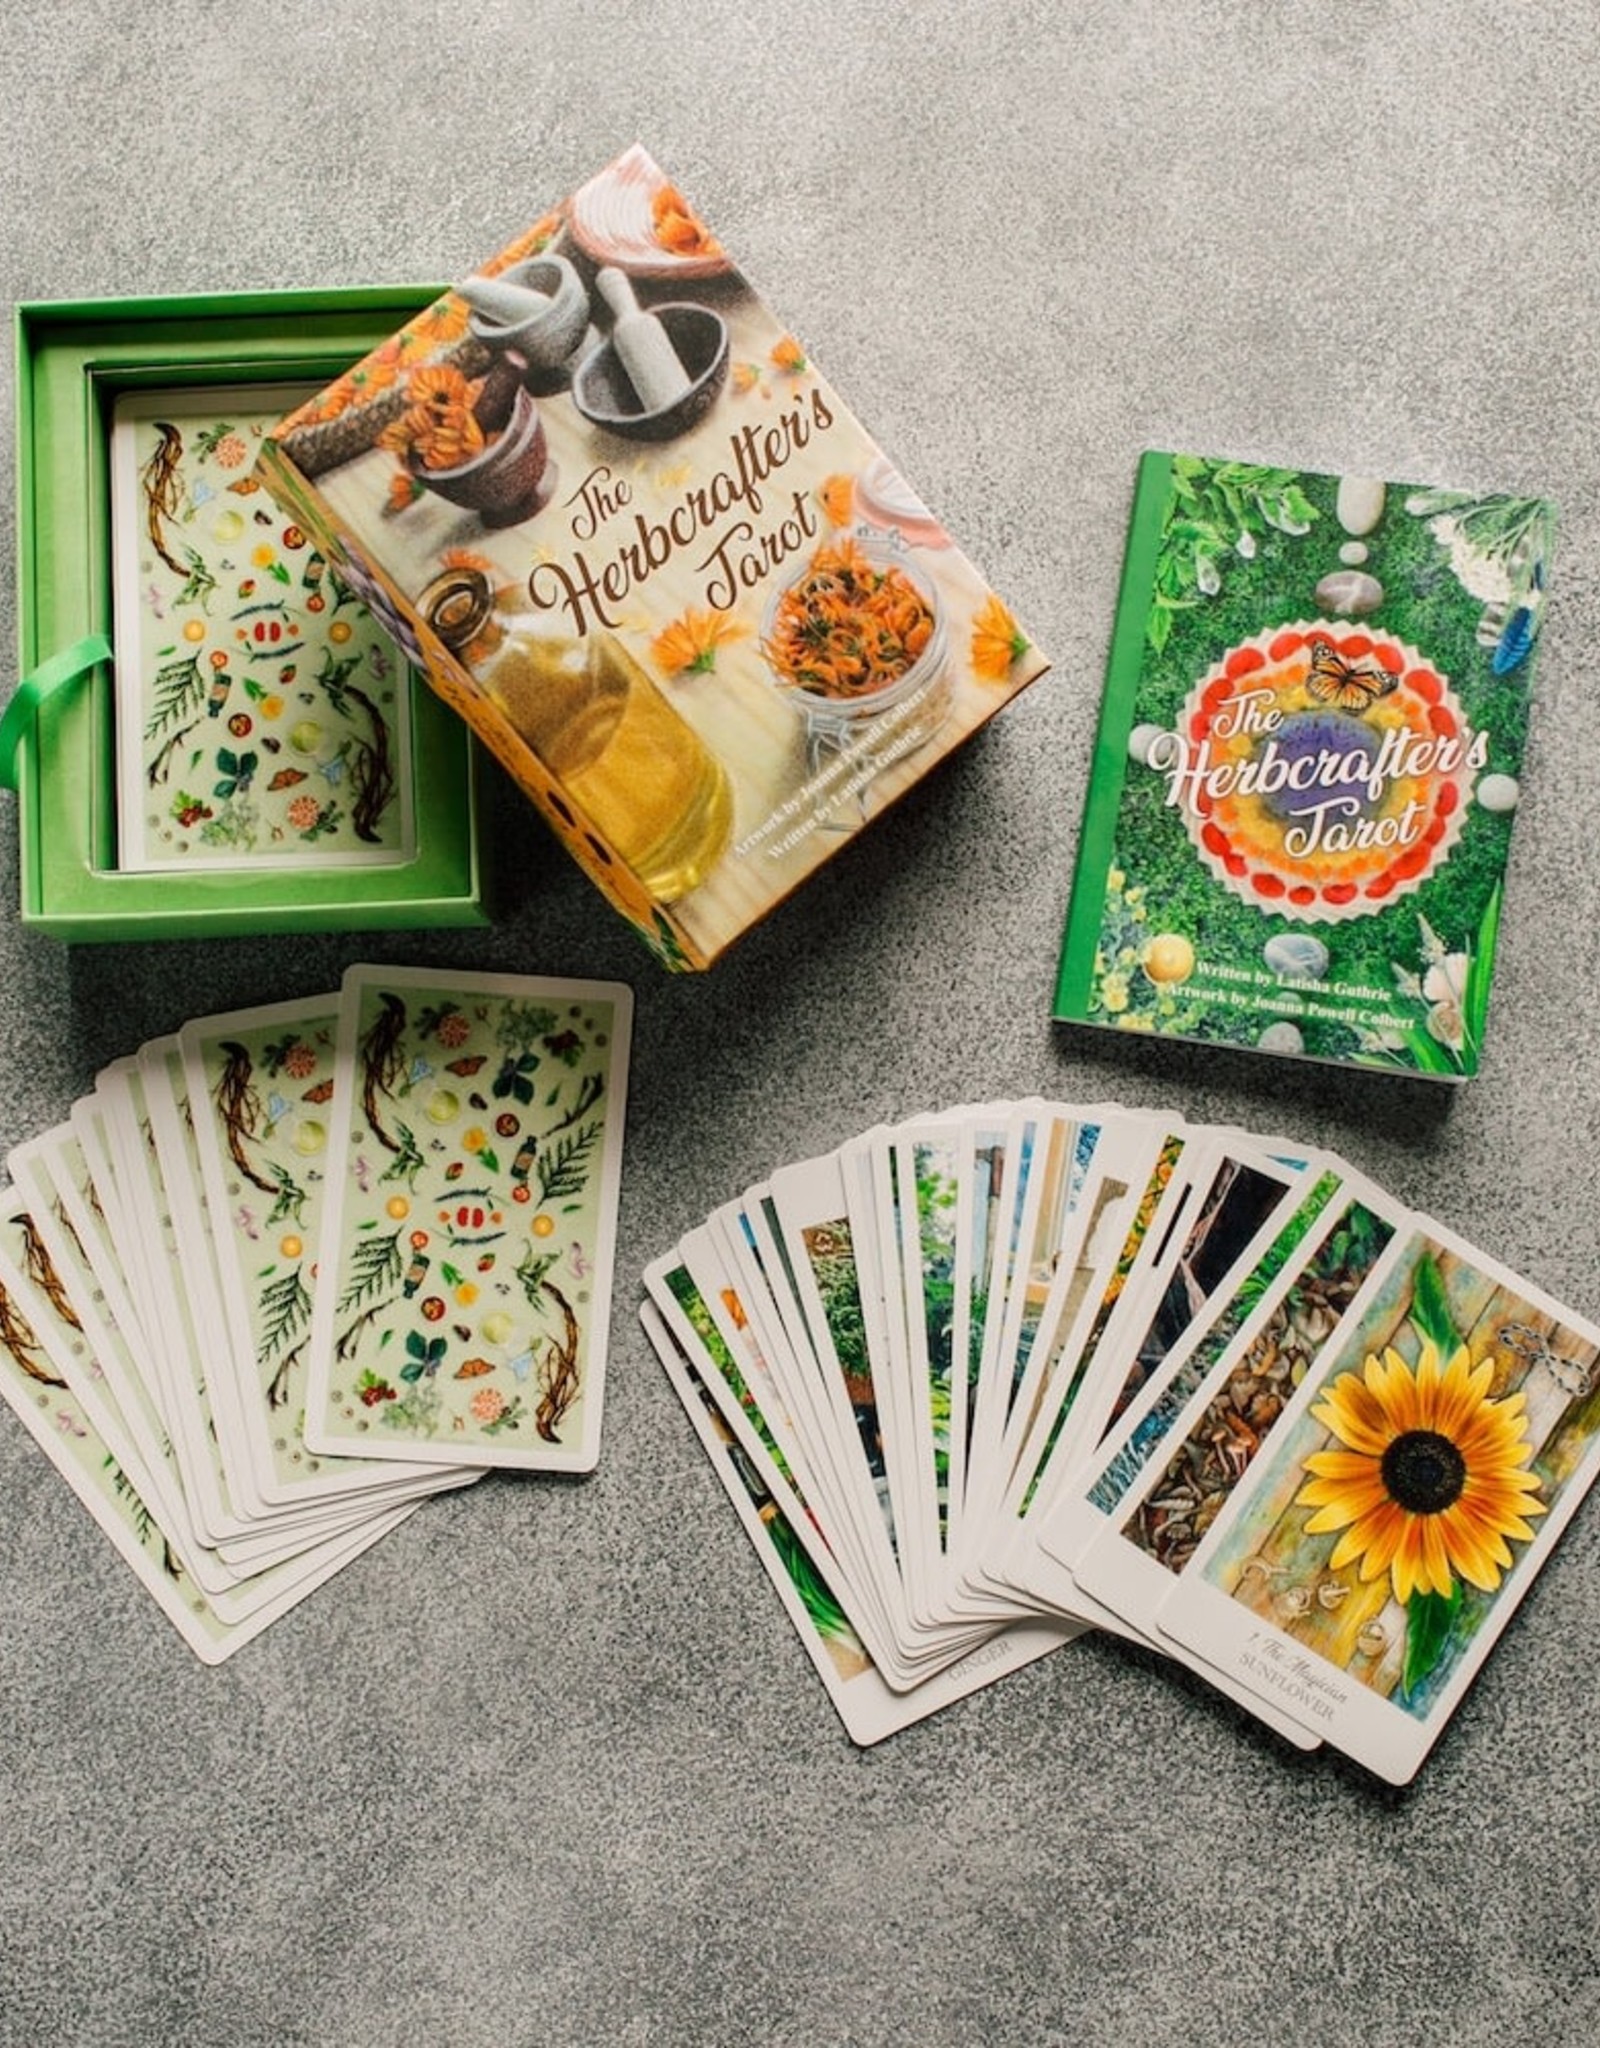 US GAMES SYSTEMS The Herbcrafter's Tarot Deck